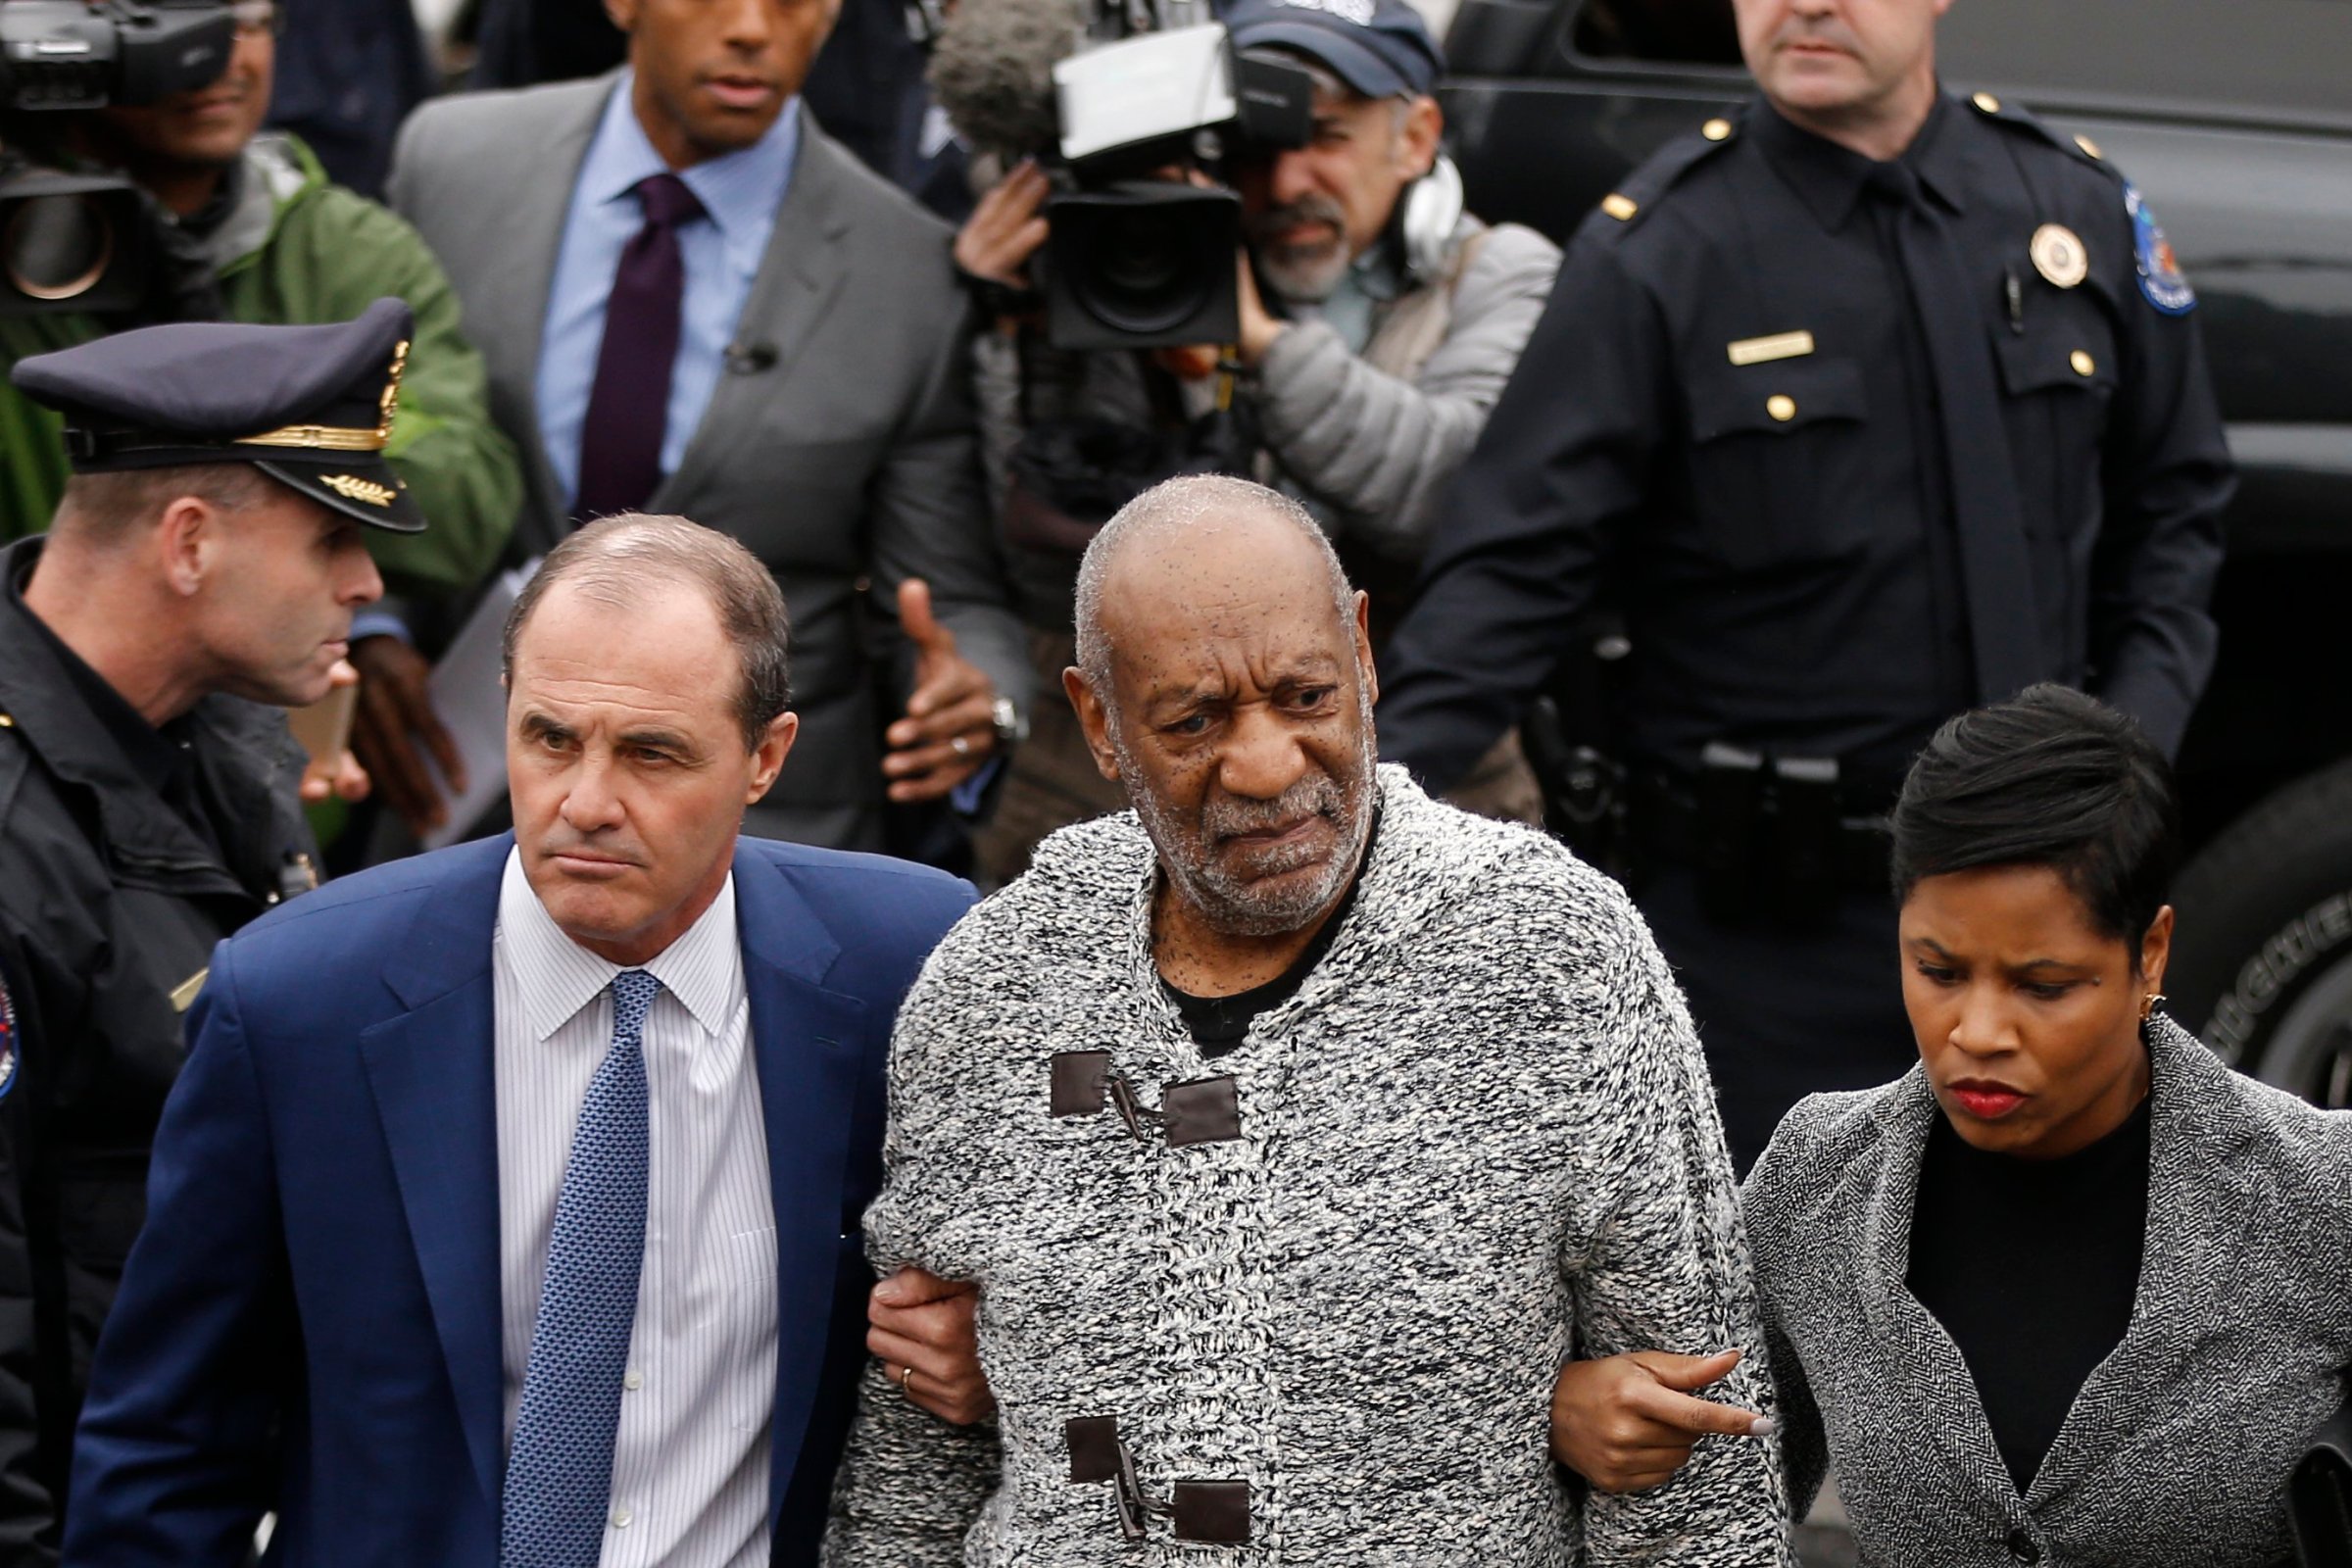 Bill Cosby accompanied by his attorneys Brian McMonagle and Monique Pressley, arrive at court to face a felony charge of aggravated indecent assault, in Elkins Park, Pa. on Dec. 30, 2015.